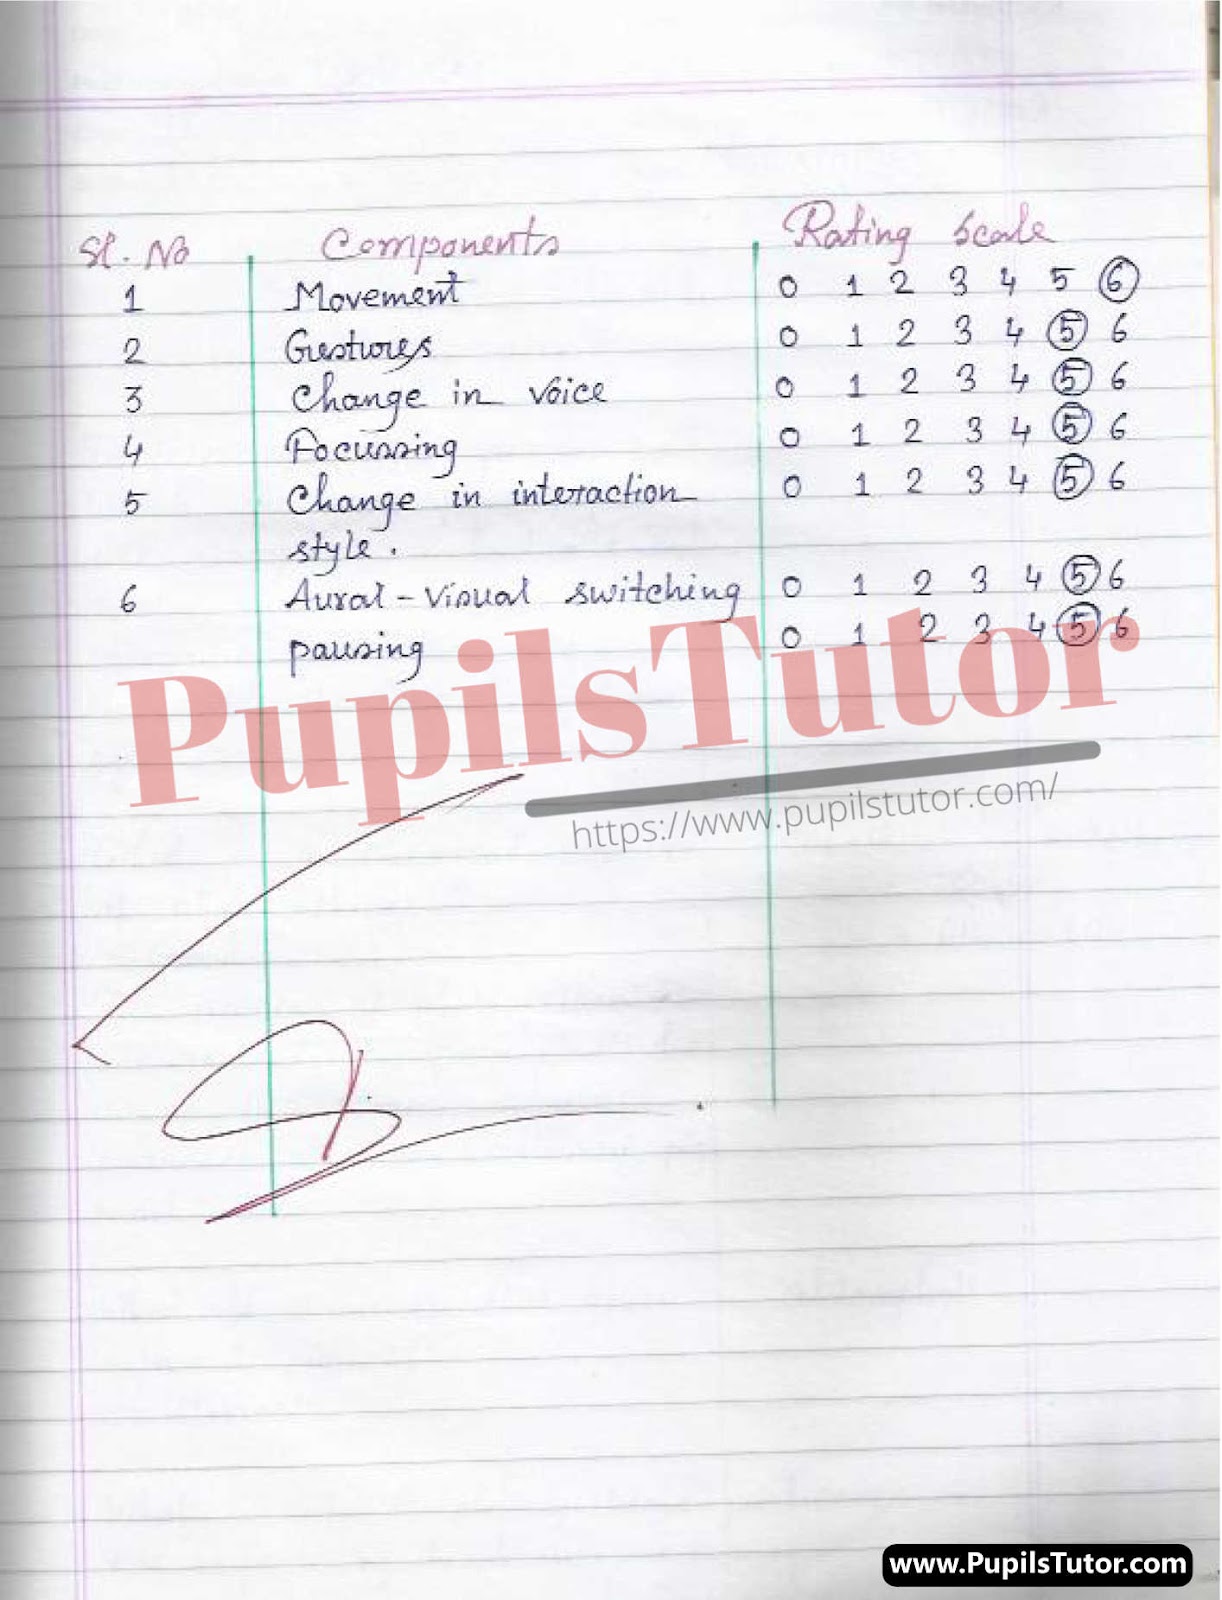 Class/Grade 7 To 9 Biological Science Micro Teaching Skill Of Stimulus Variation Lesson Plan On Types Of Plant Movements For CBSE NCERT KVS School And University College Teachers – (Page And Image Number 3) – www.pupilstutor.com